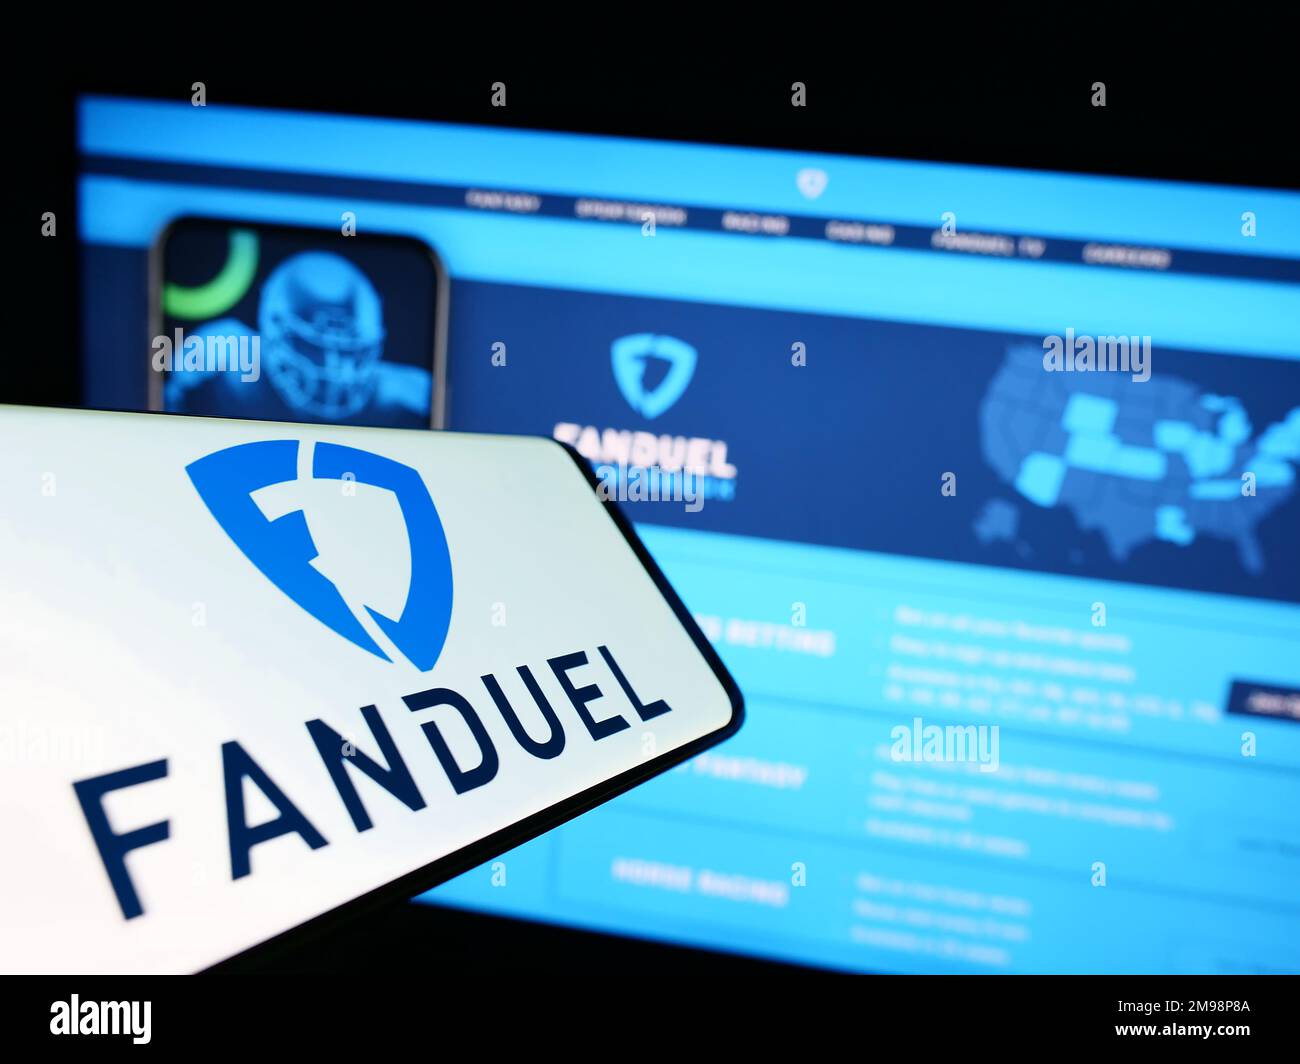 Smartphone with logo of American gambling company FanDuel Inc. on screen in front of business website. Focus on center-right of phone display. Stock Photo